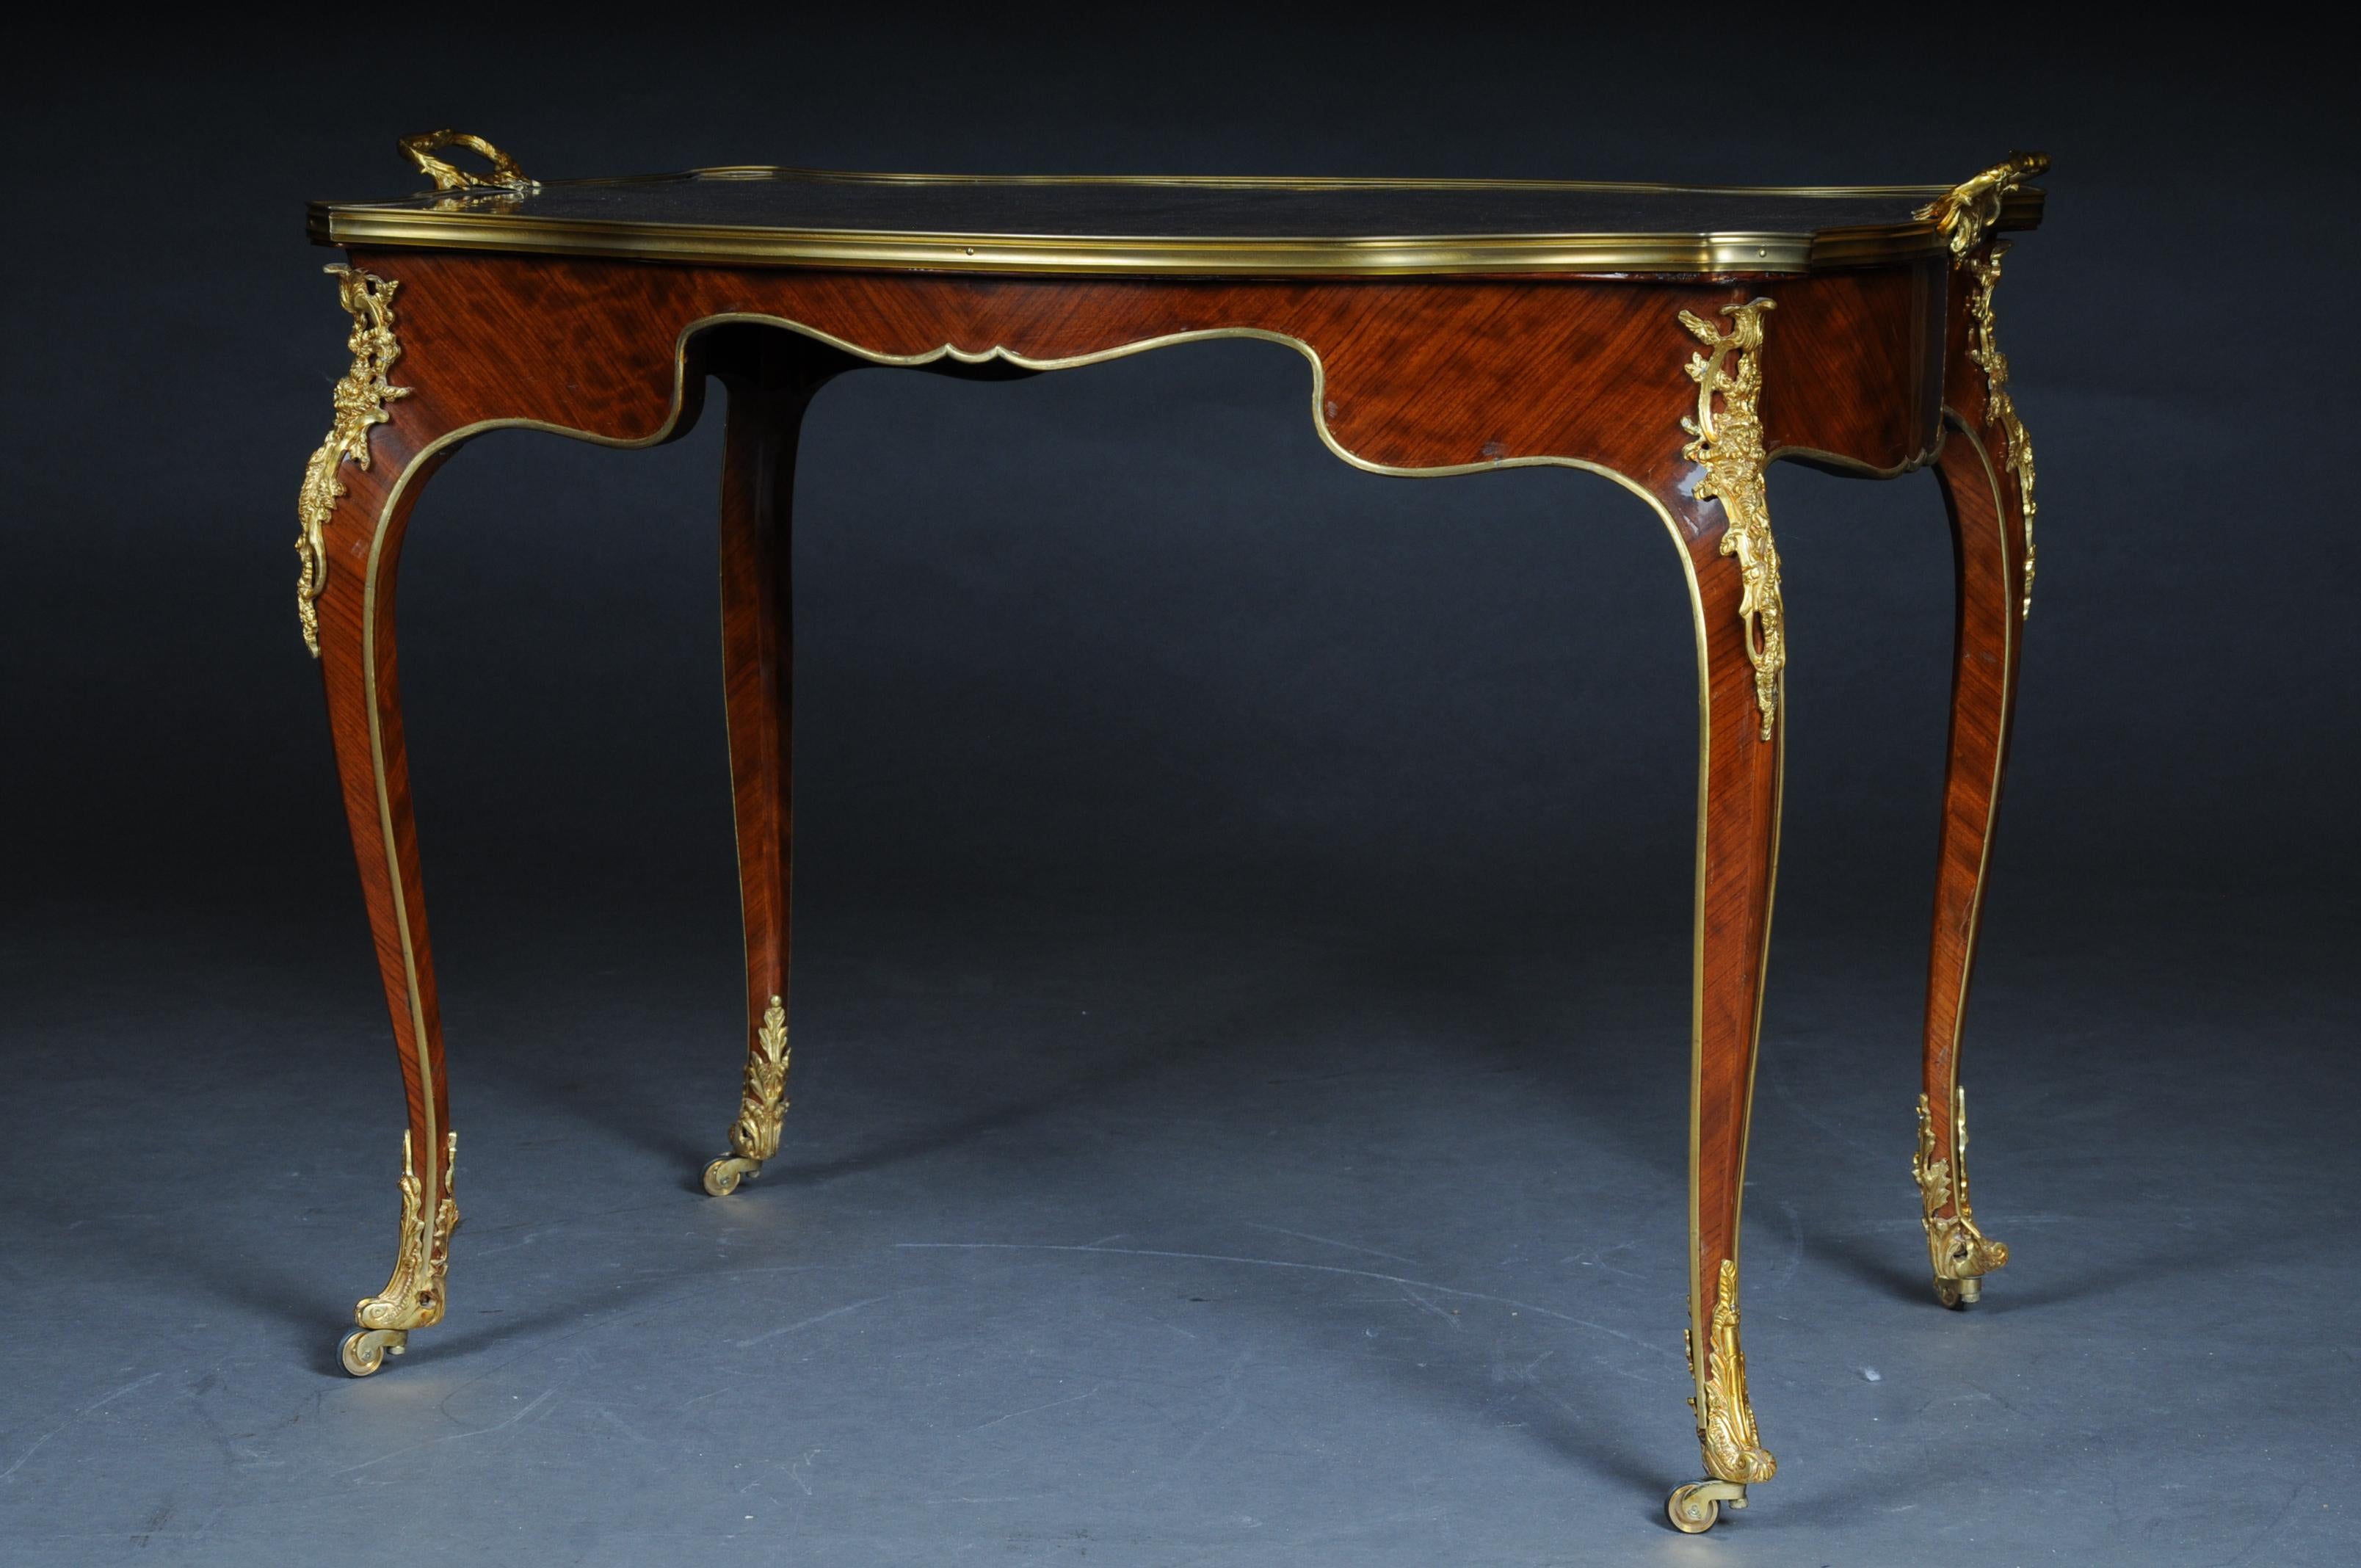 Elegant French Salon Table in Louis Quinze Style For Sale 7